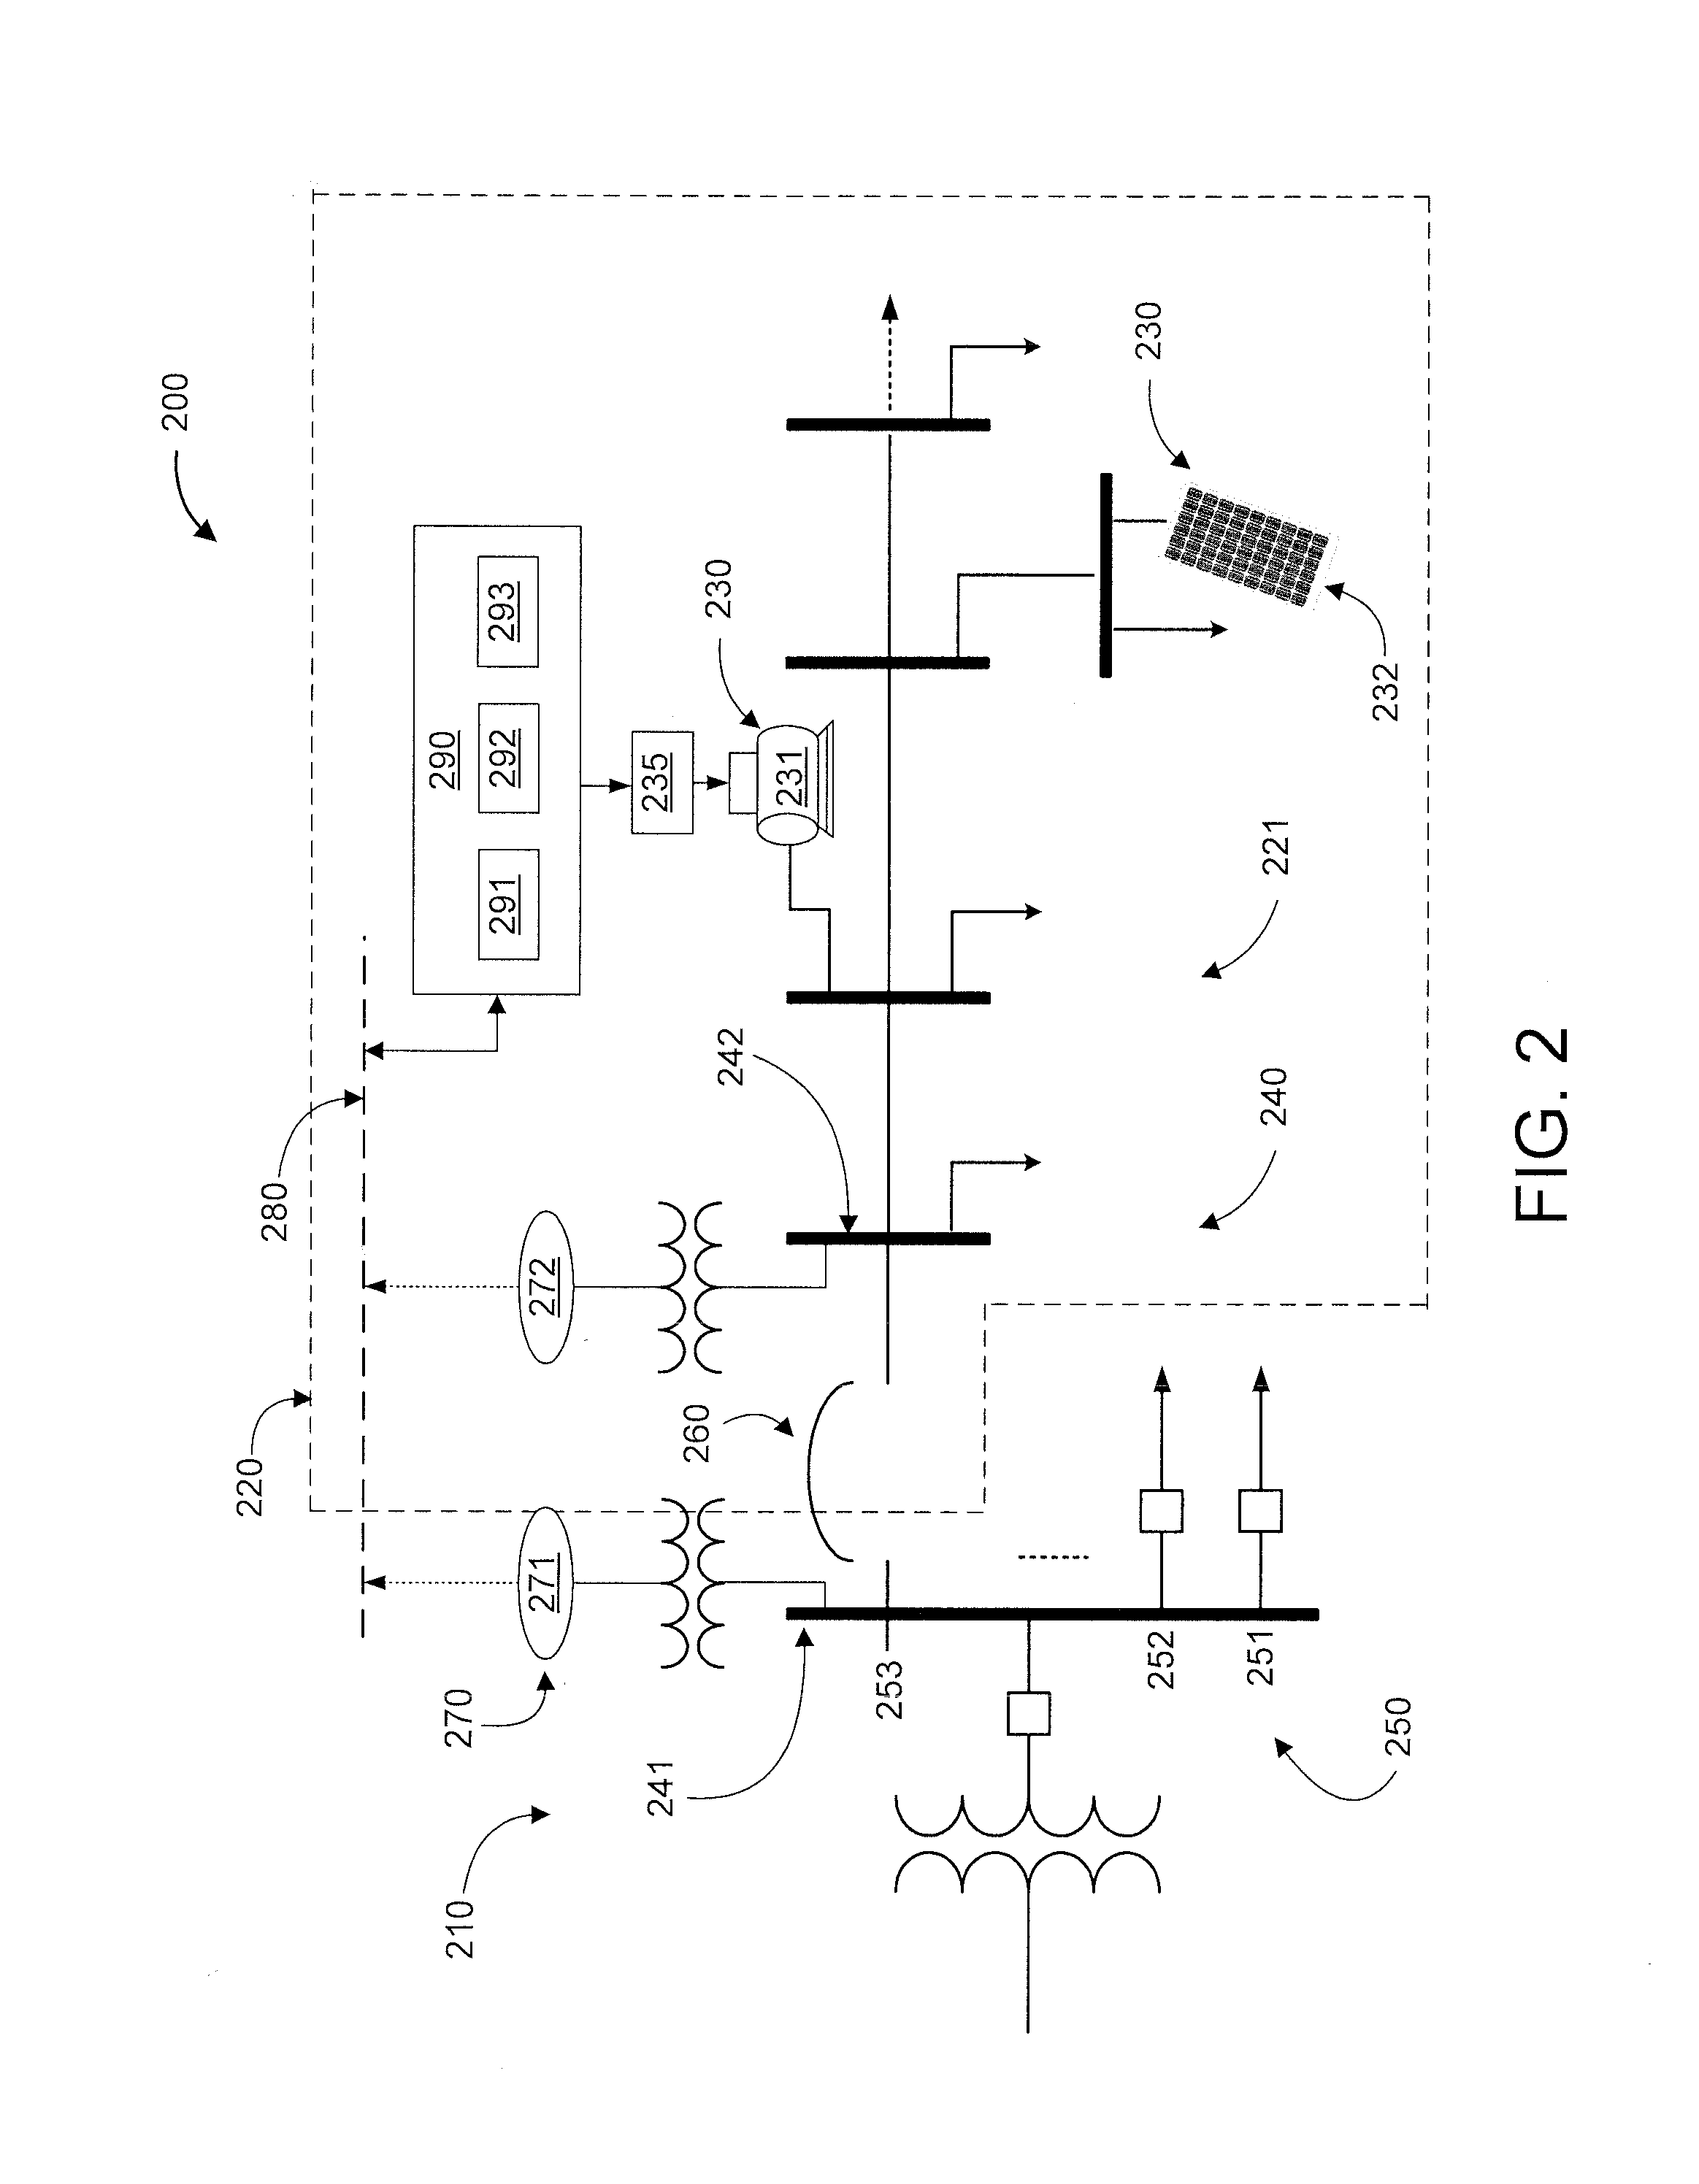 Synchronization control for reconnecting microgrid to main grid after islanding